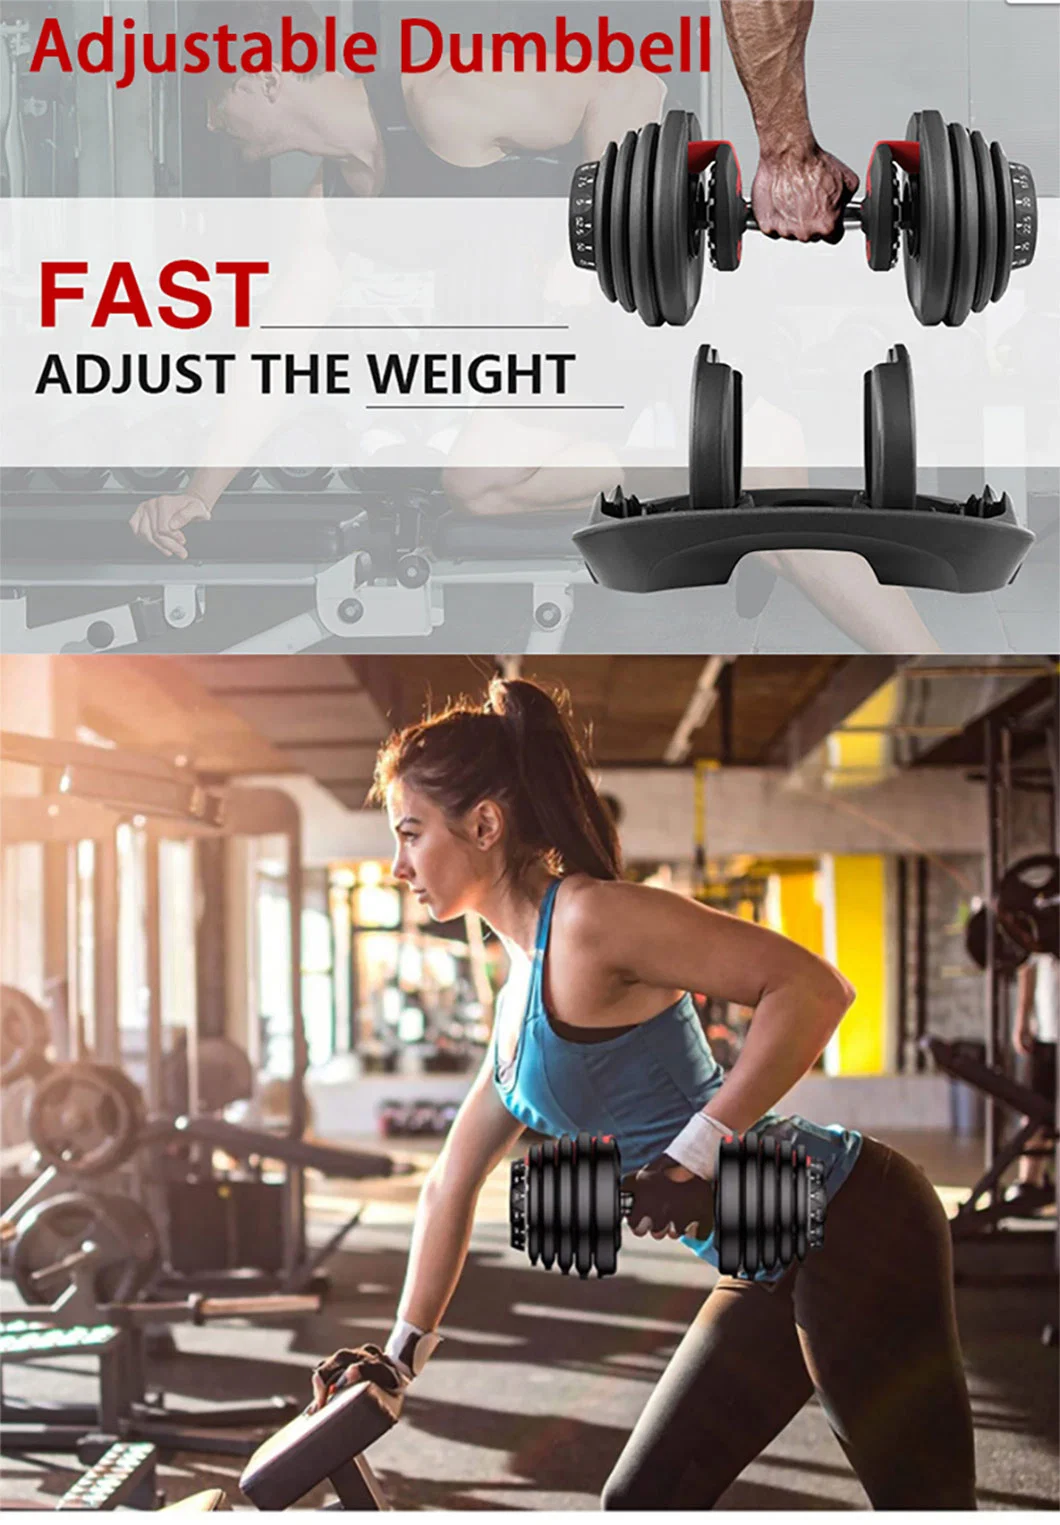 25-55 Pounds Rubber Cast Iron 5-in-1 Durable Dial Dumbbell Pair Single for Every Fitness Goal